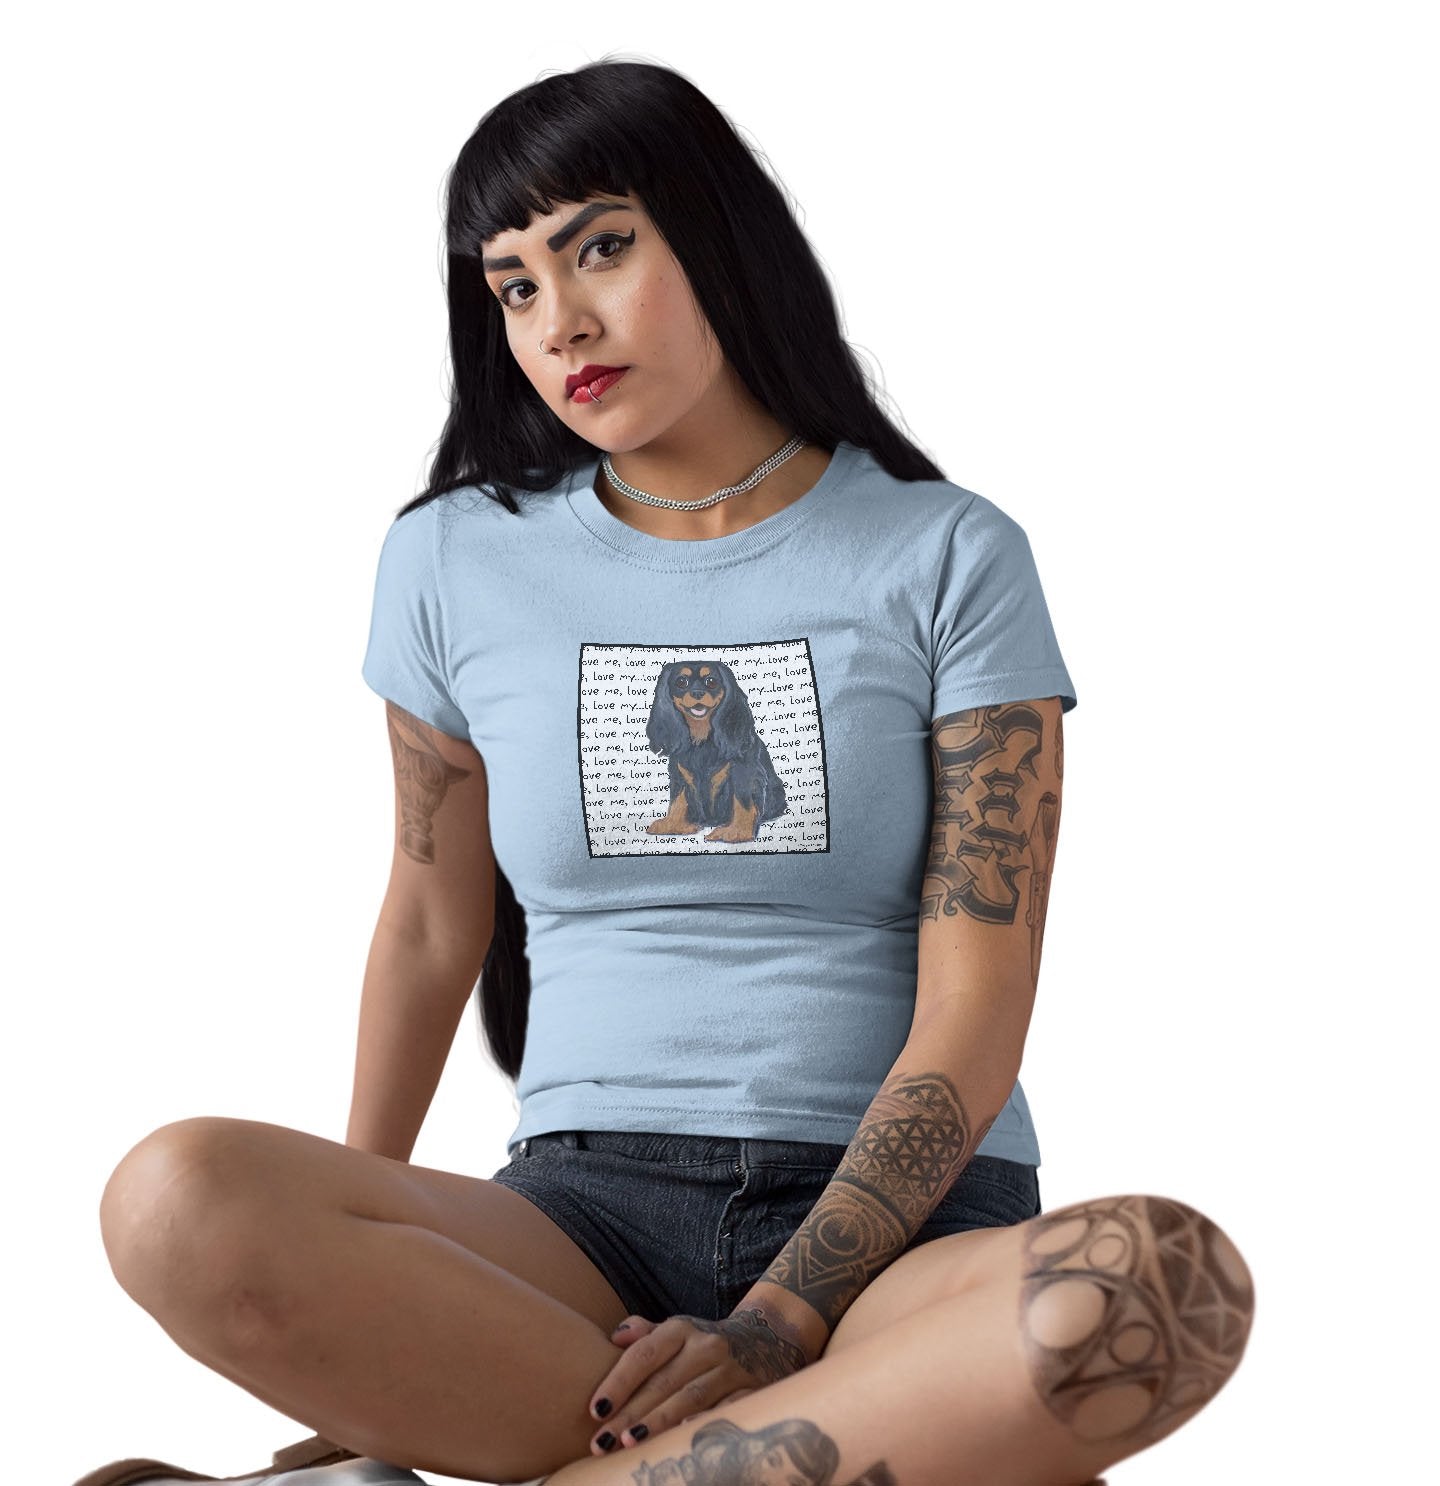 Black & Tan Cavalier Love Text - Women's Fitted T-Shirt